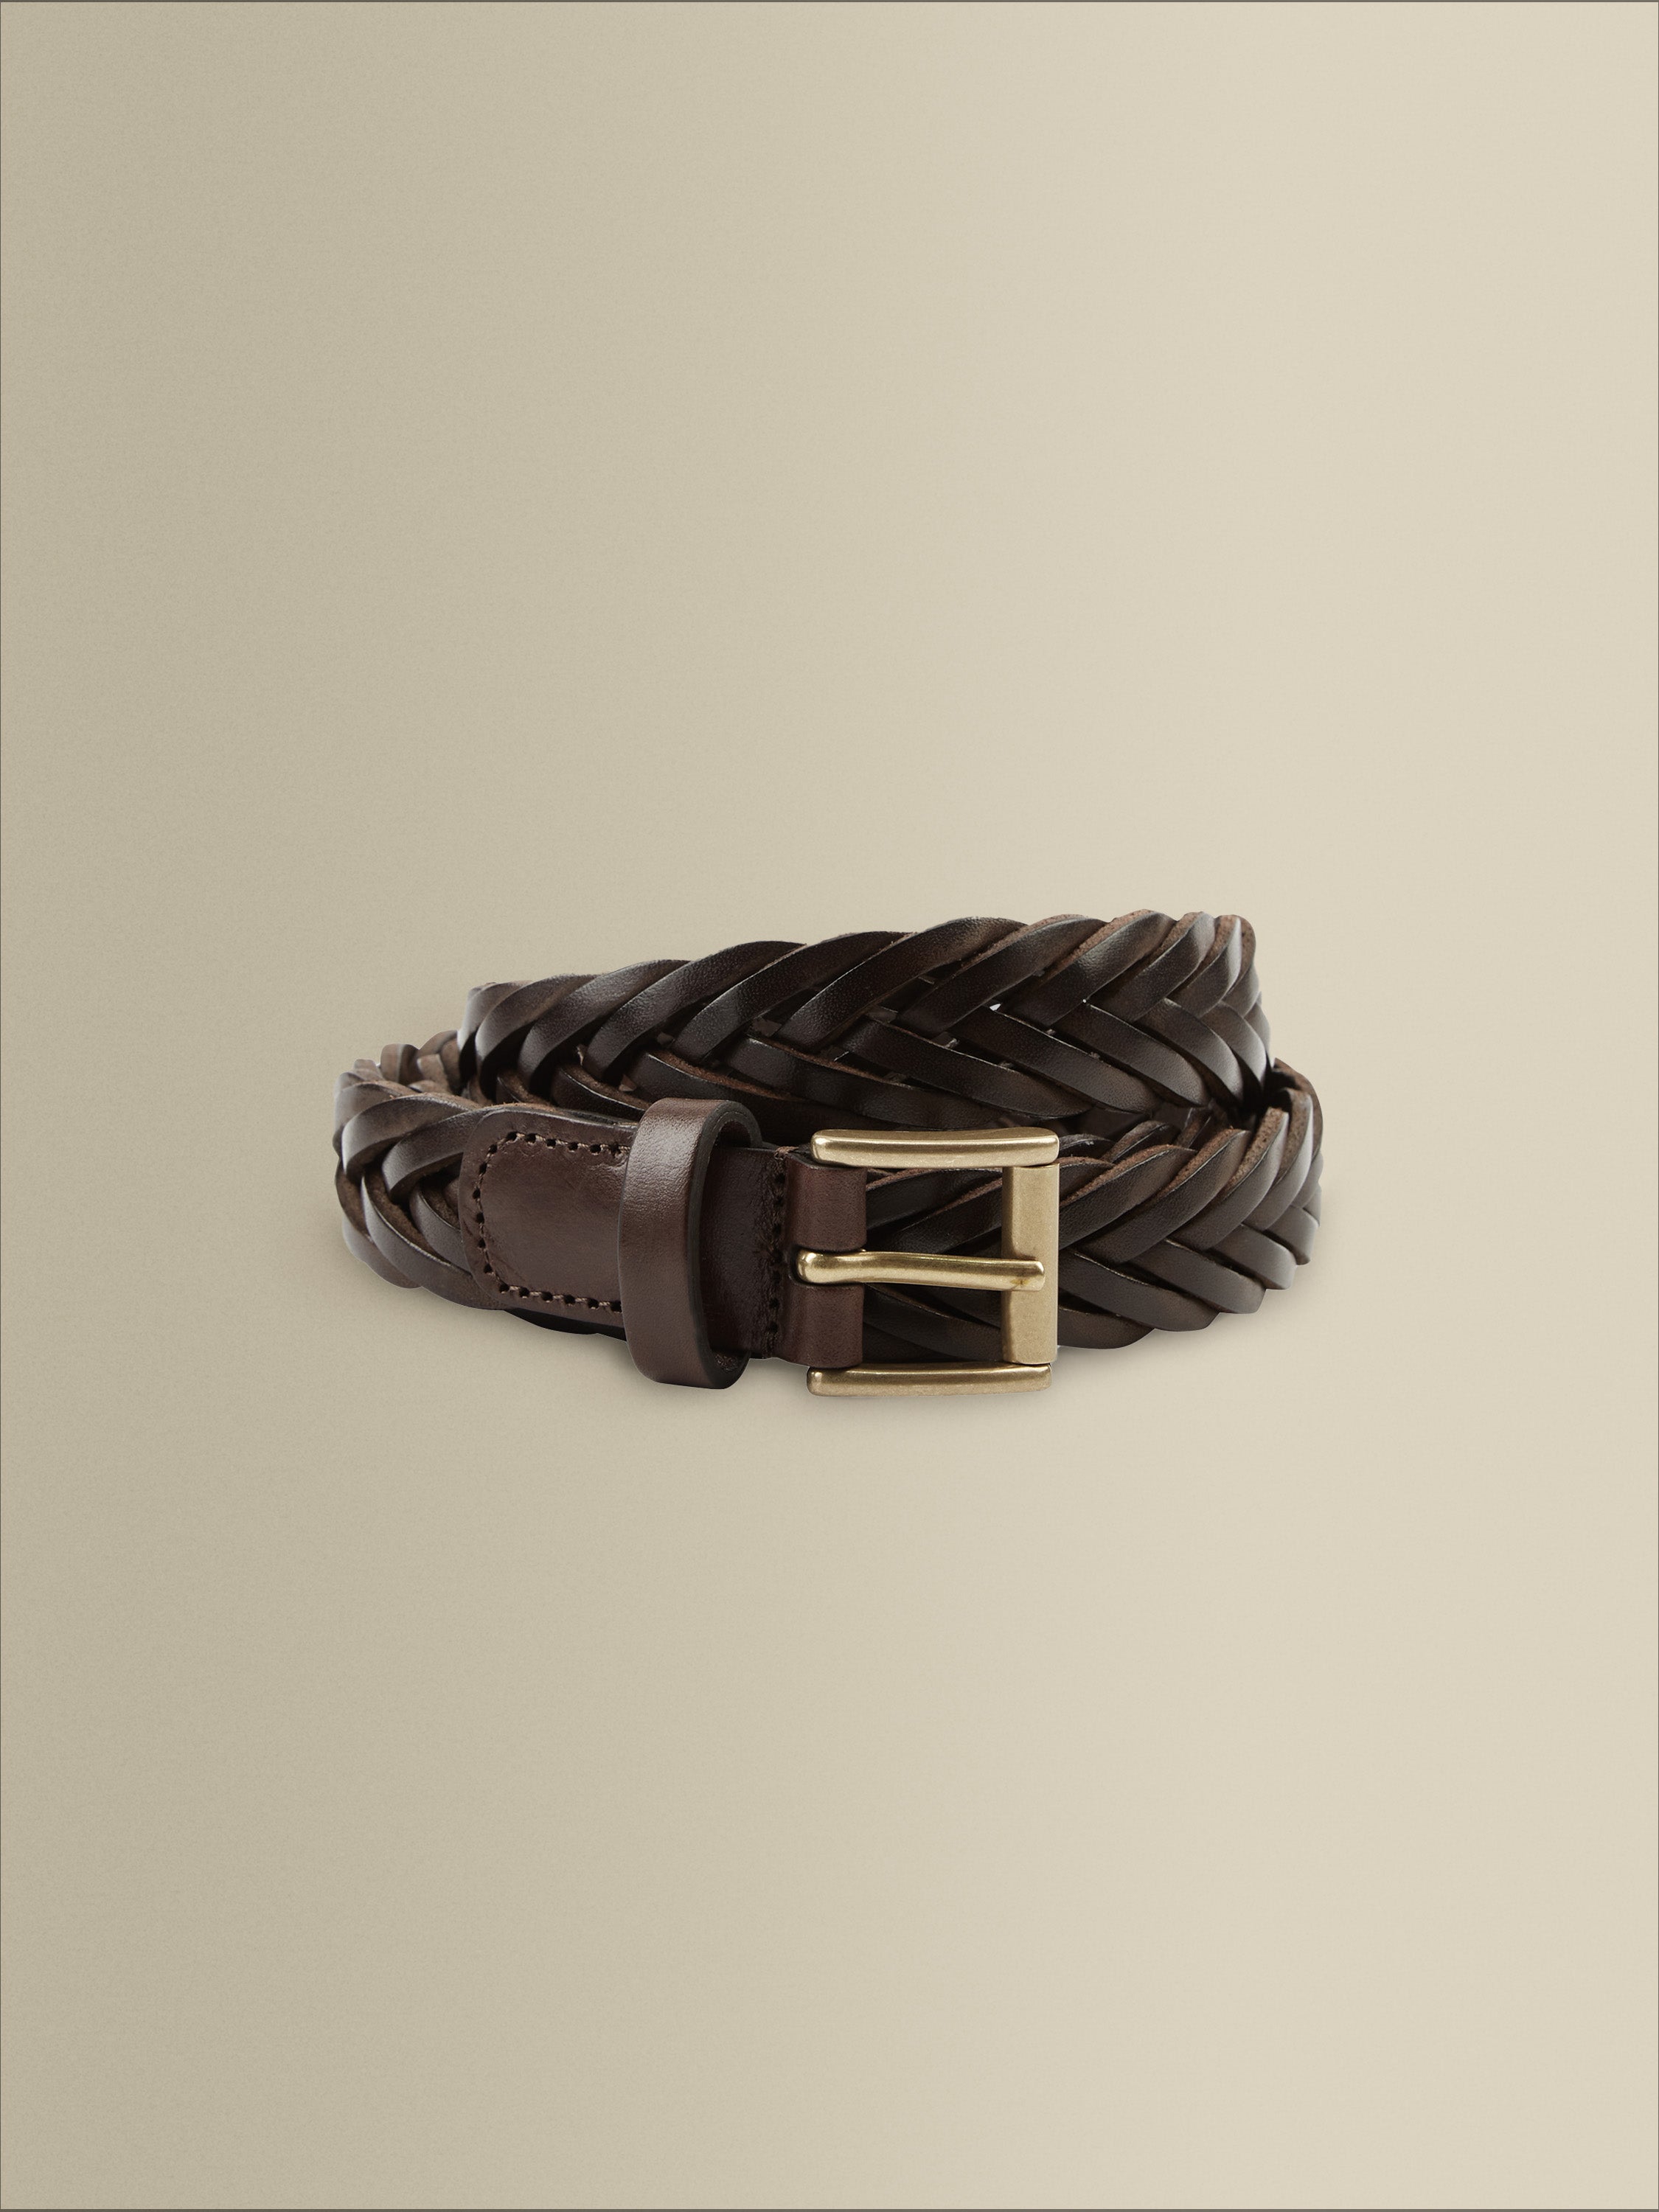 Woven Leather Belt Brown Product